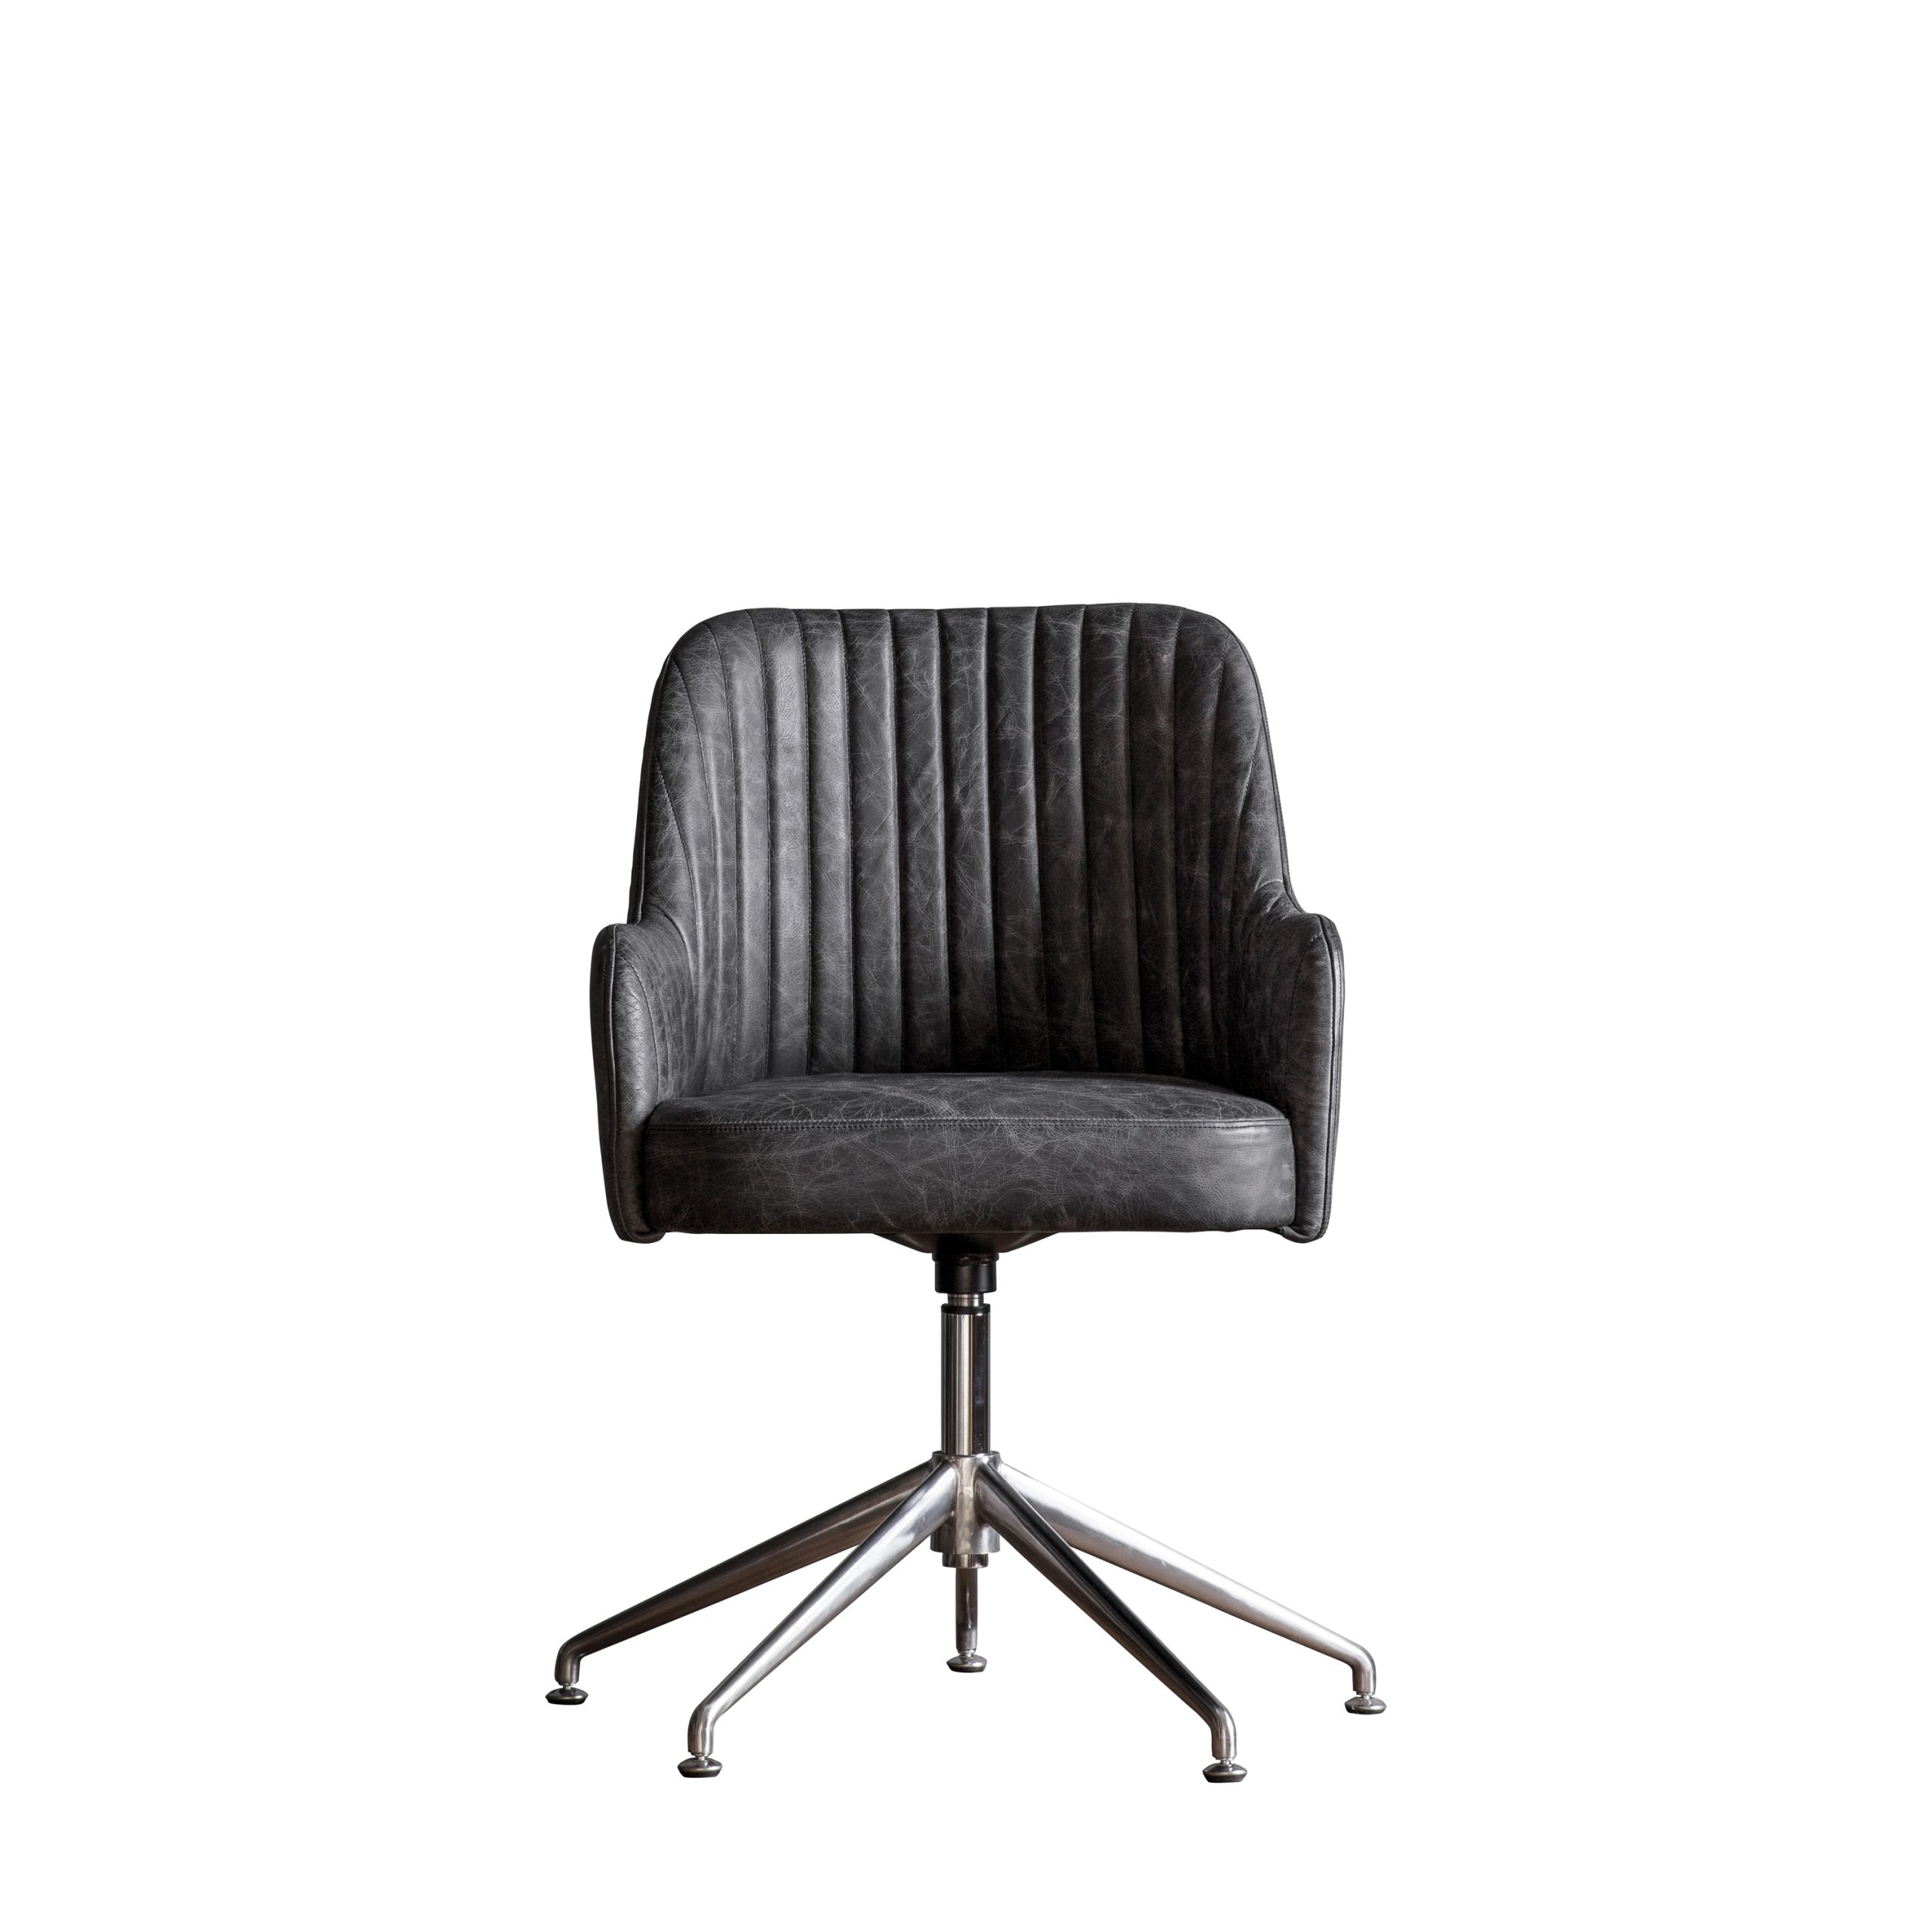 Gallery Direct Curie Swivel Chair Antique Ebony